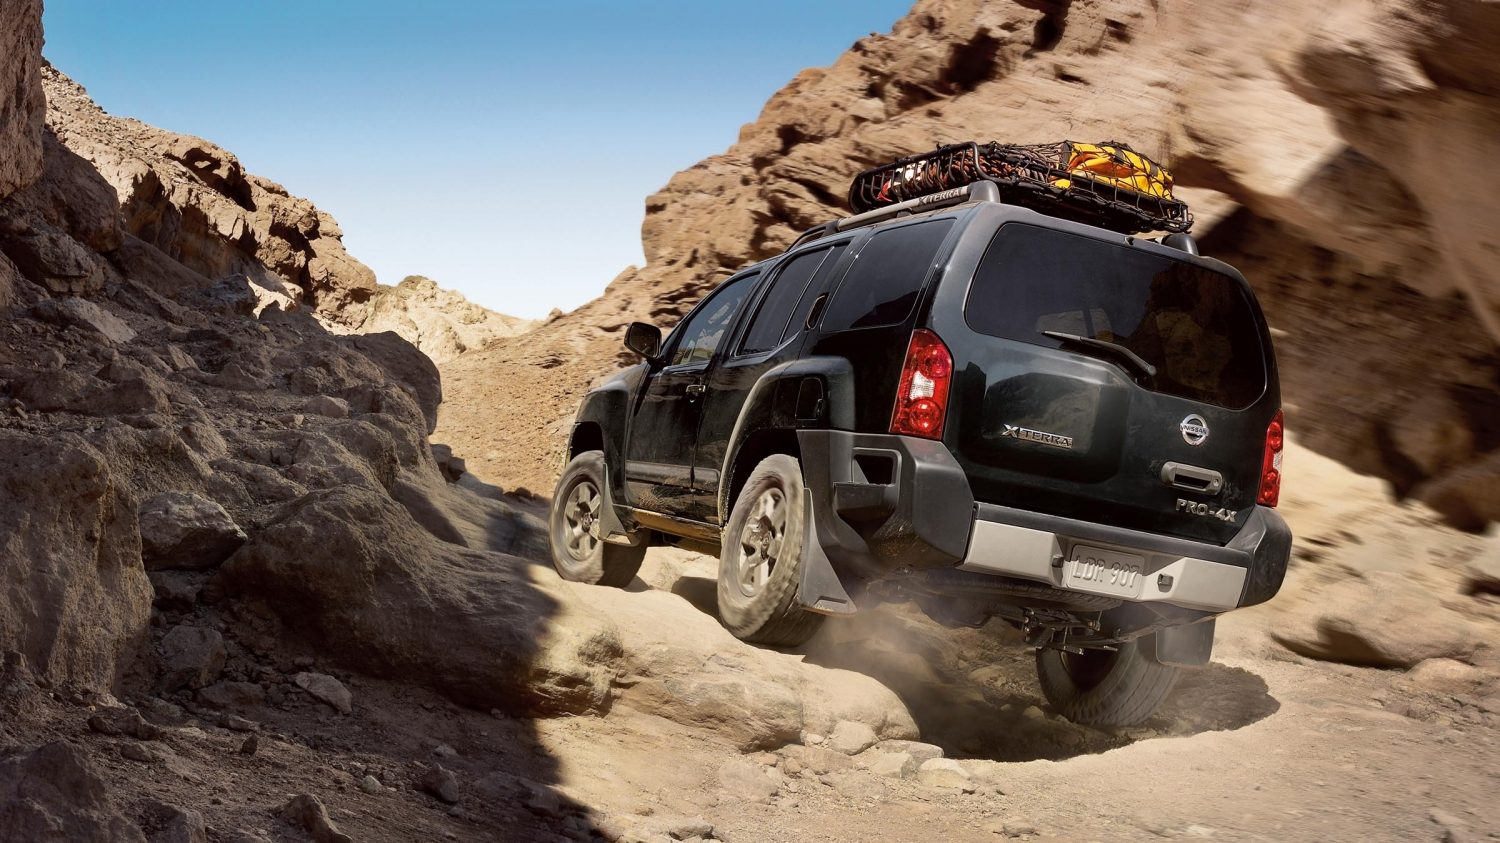 2015 Xterra SUV | Roads are Optional | Nissan USA 2015 Nissan Xterra Pro 4x Towing Capacity